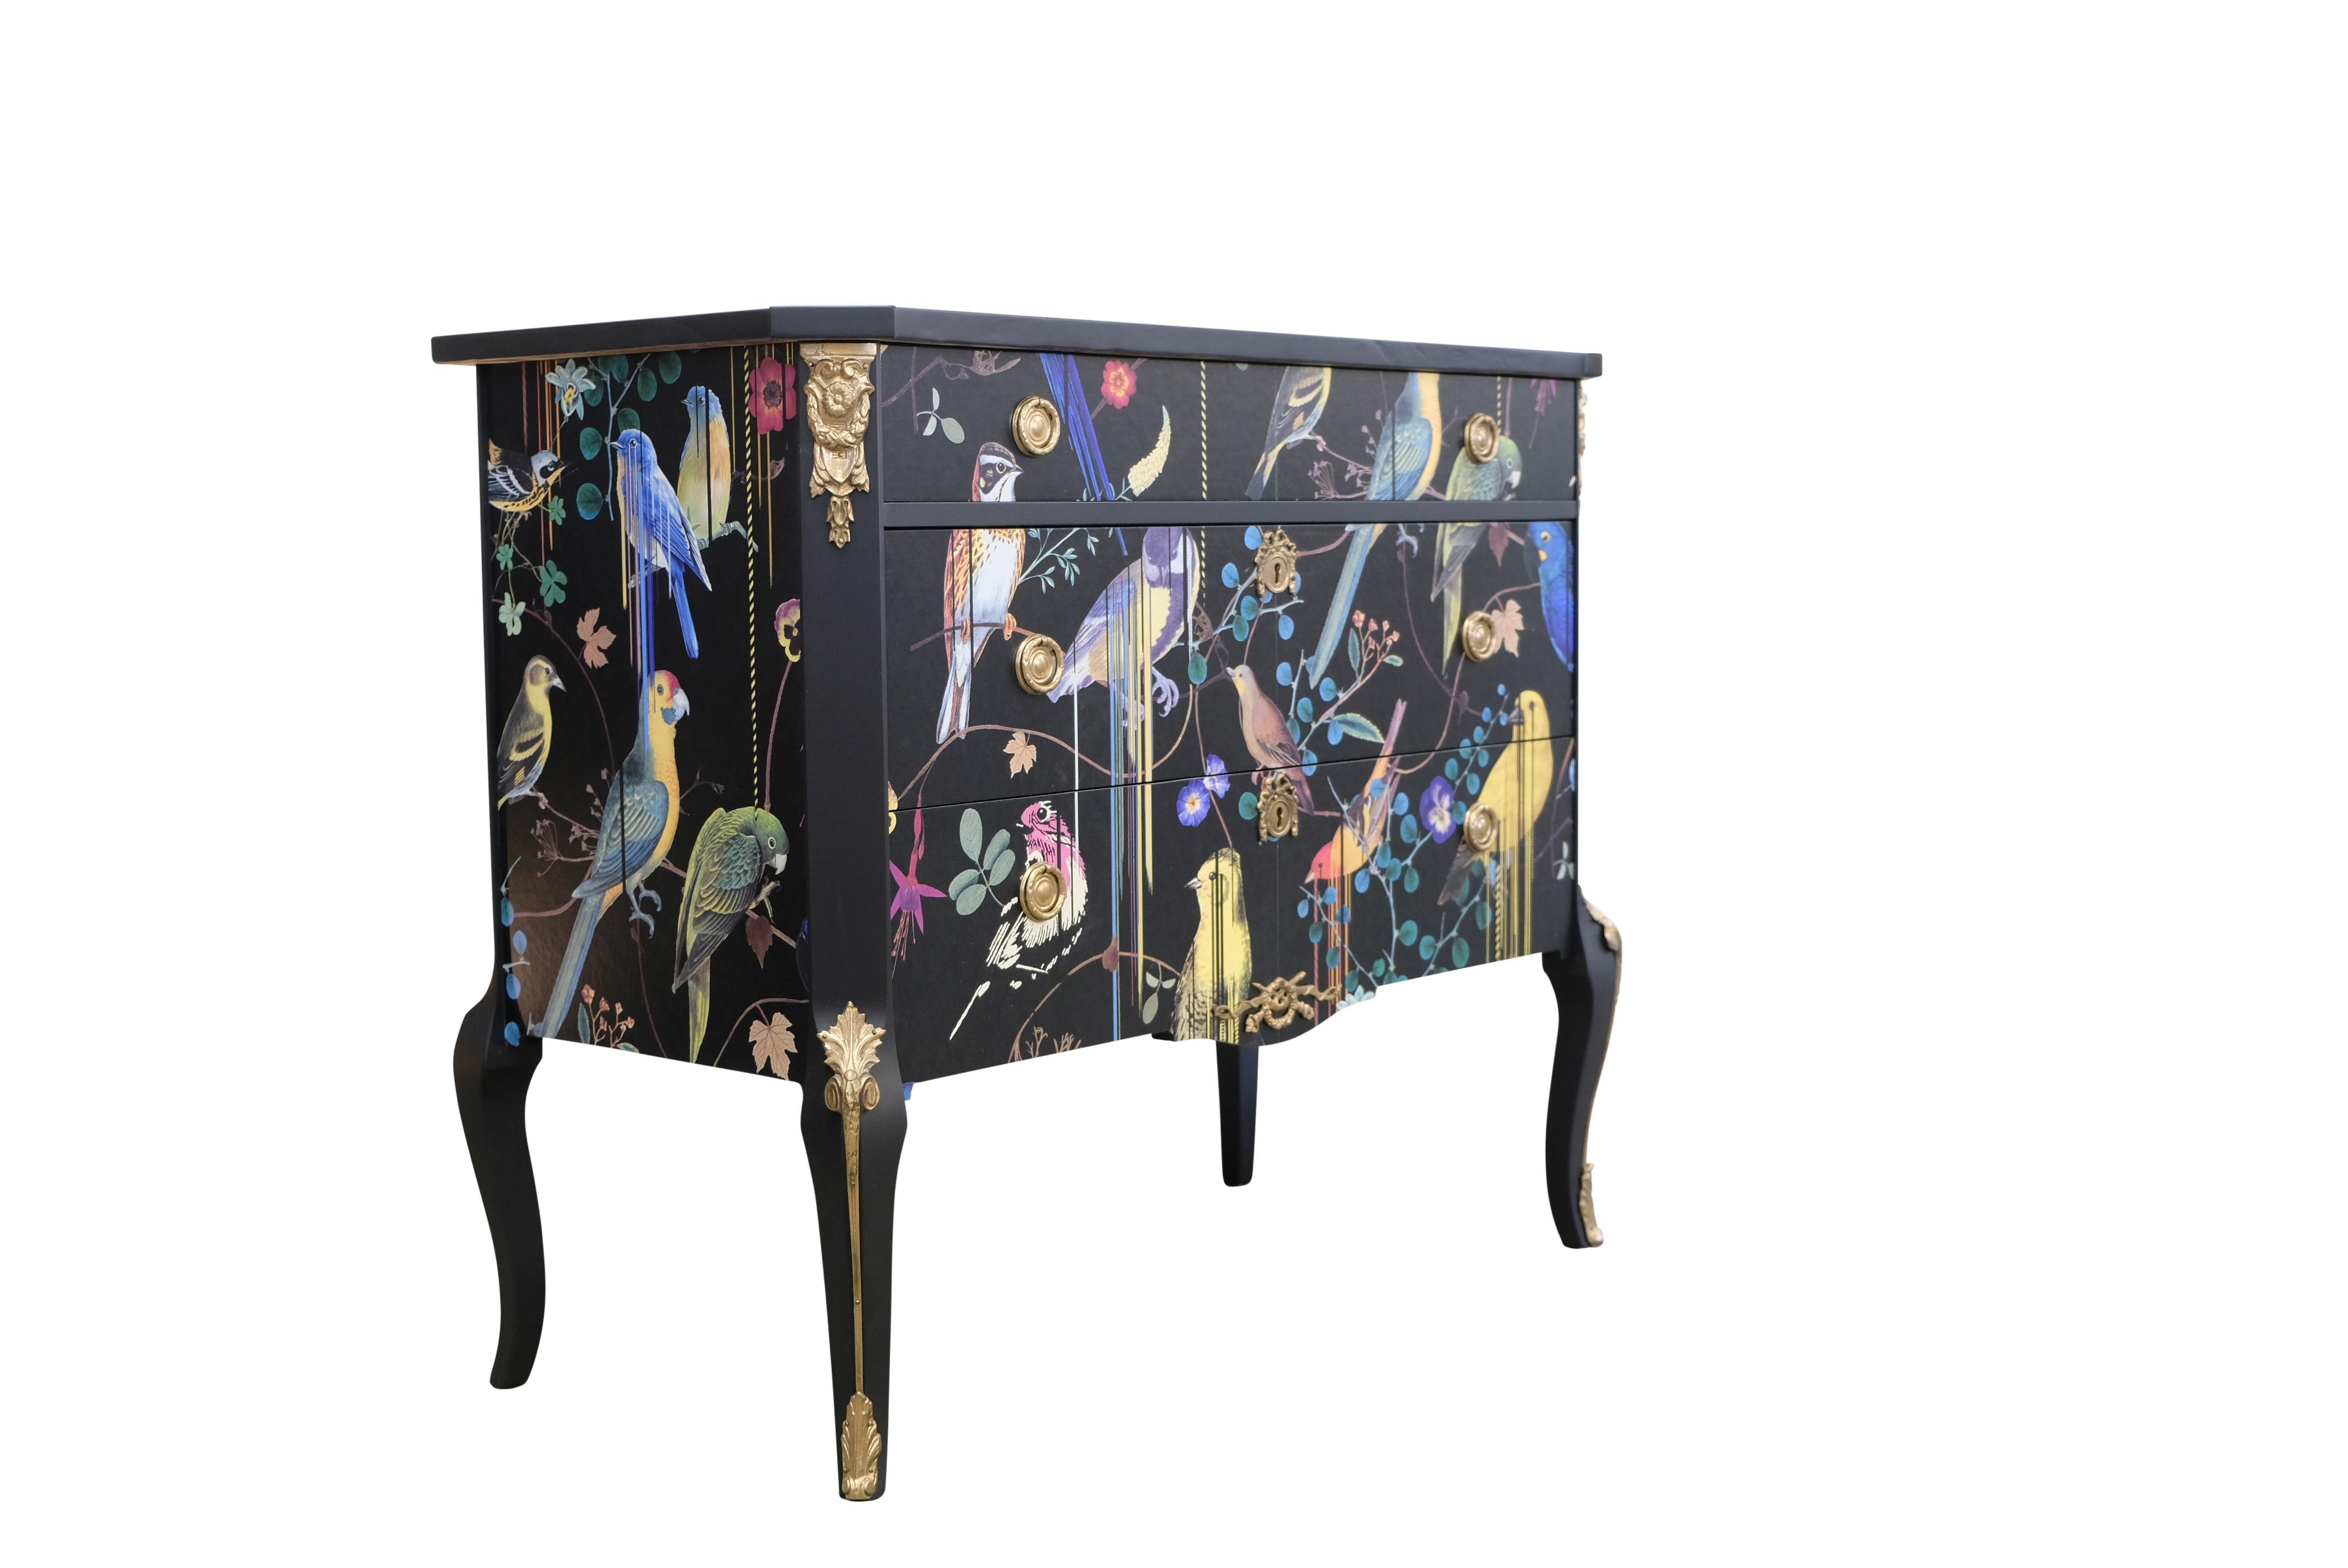 Gustavian Rococo style chests with natural marble slab and redesigned with a contemporary lacquered Christian Lacroix Birds Sinfonia finish. Fine original fittings in solid brass. 
Width: 87cm / 34.3